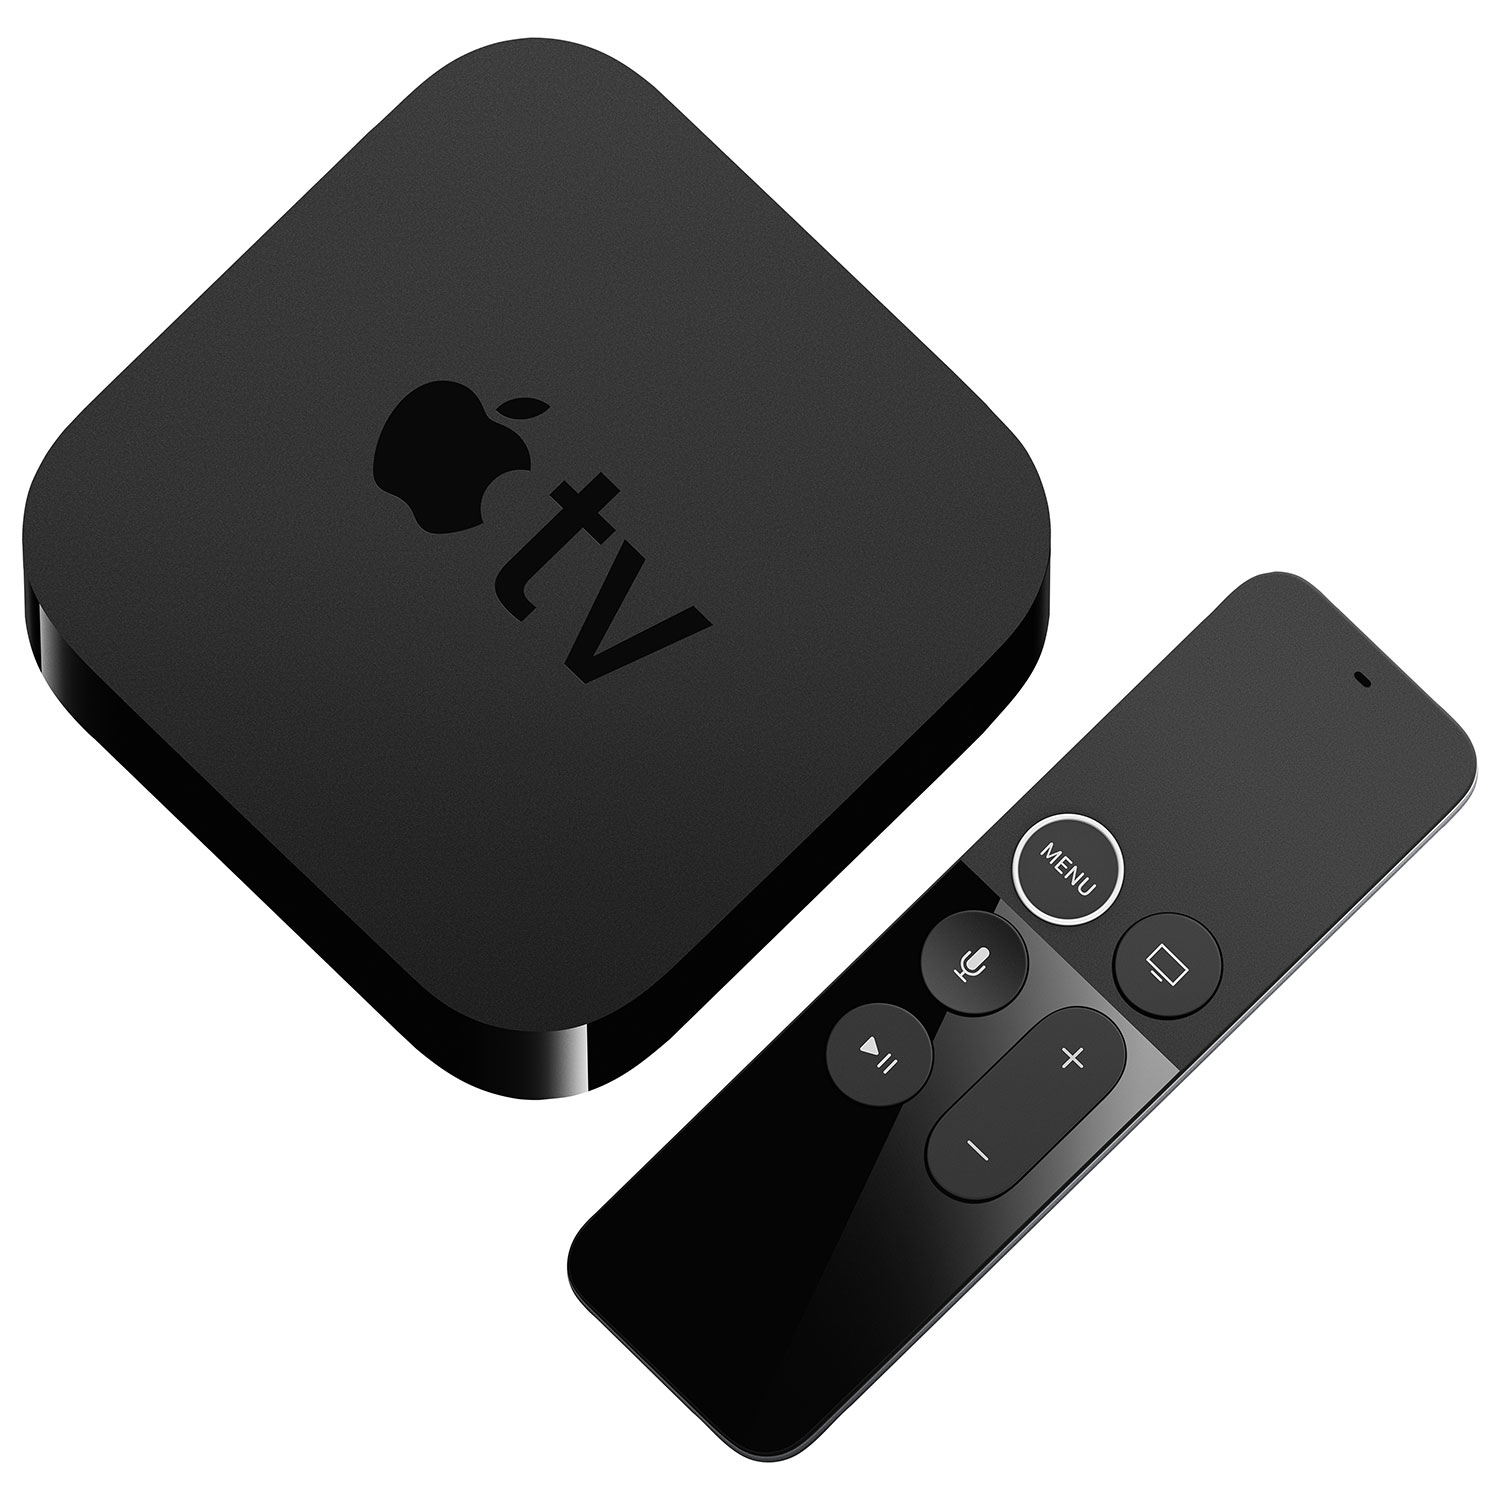 A photo of an Apple TV with remote